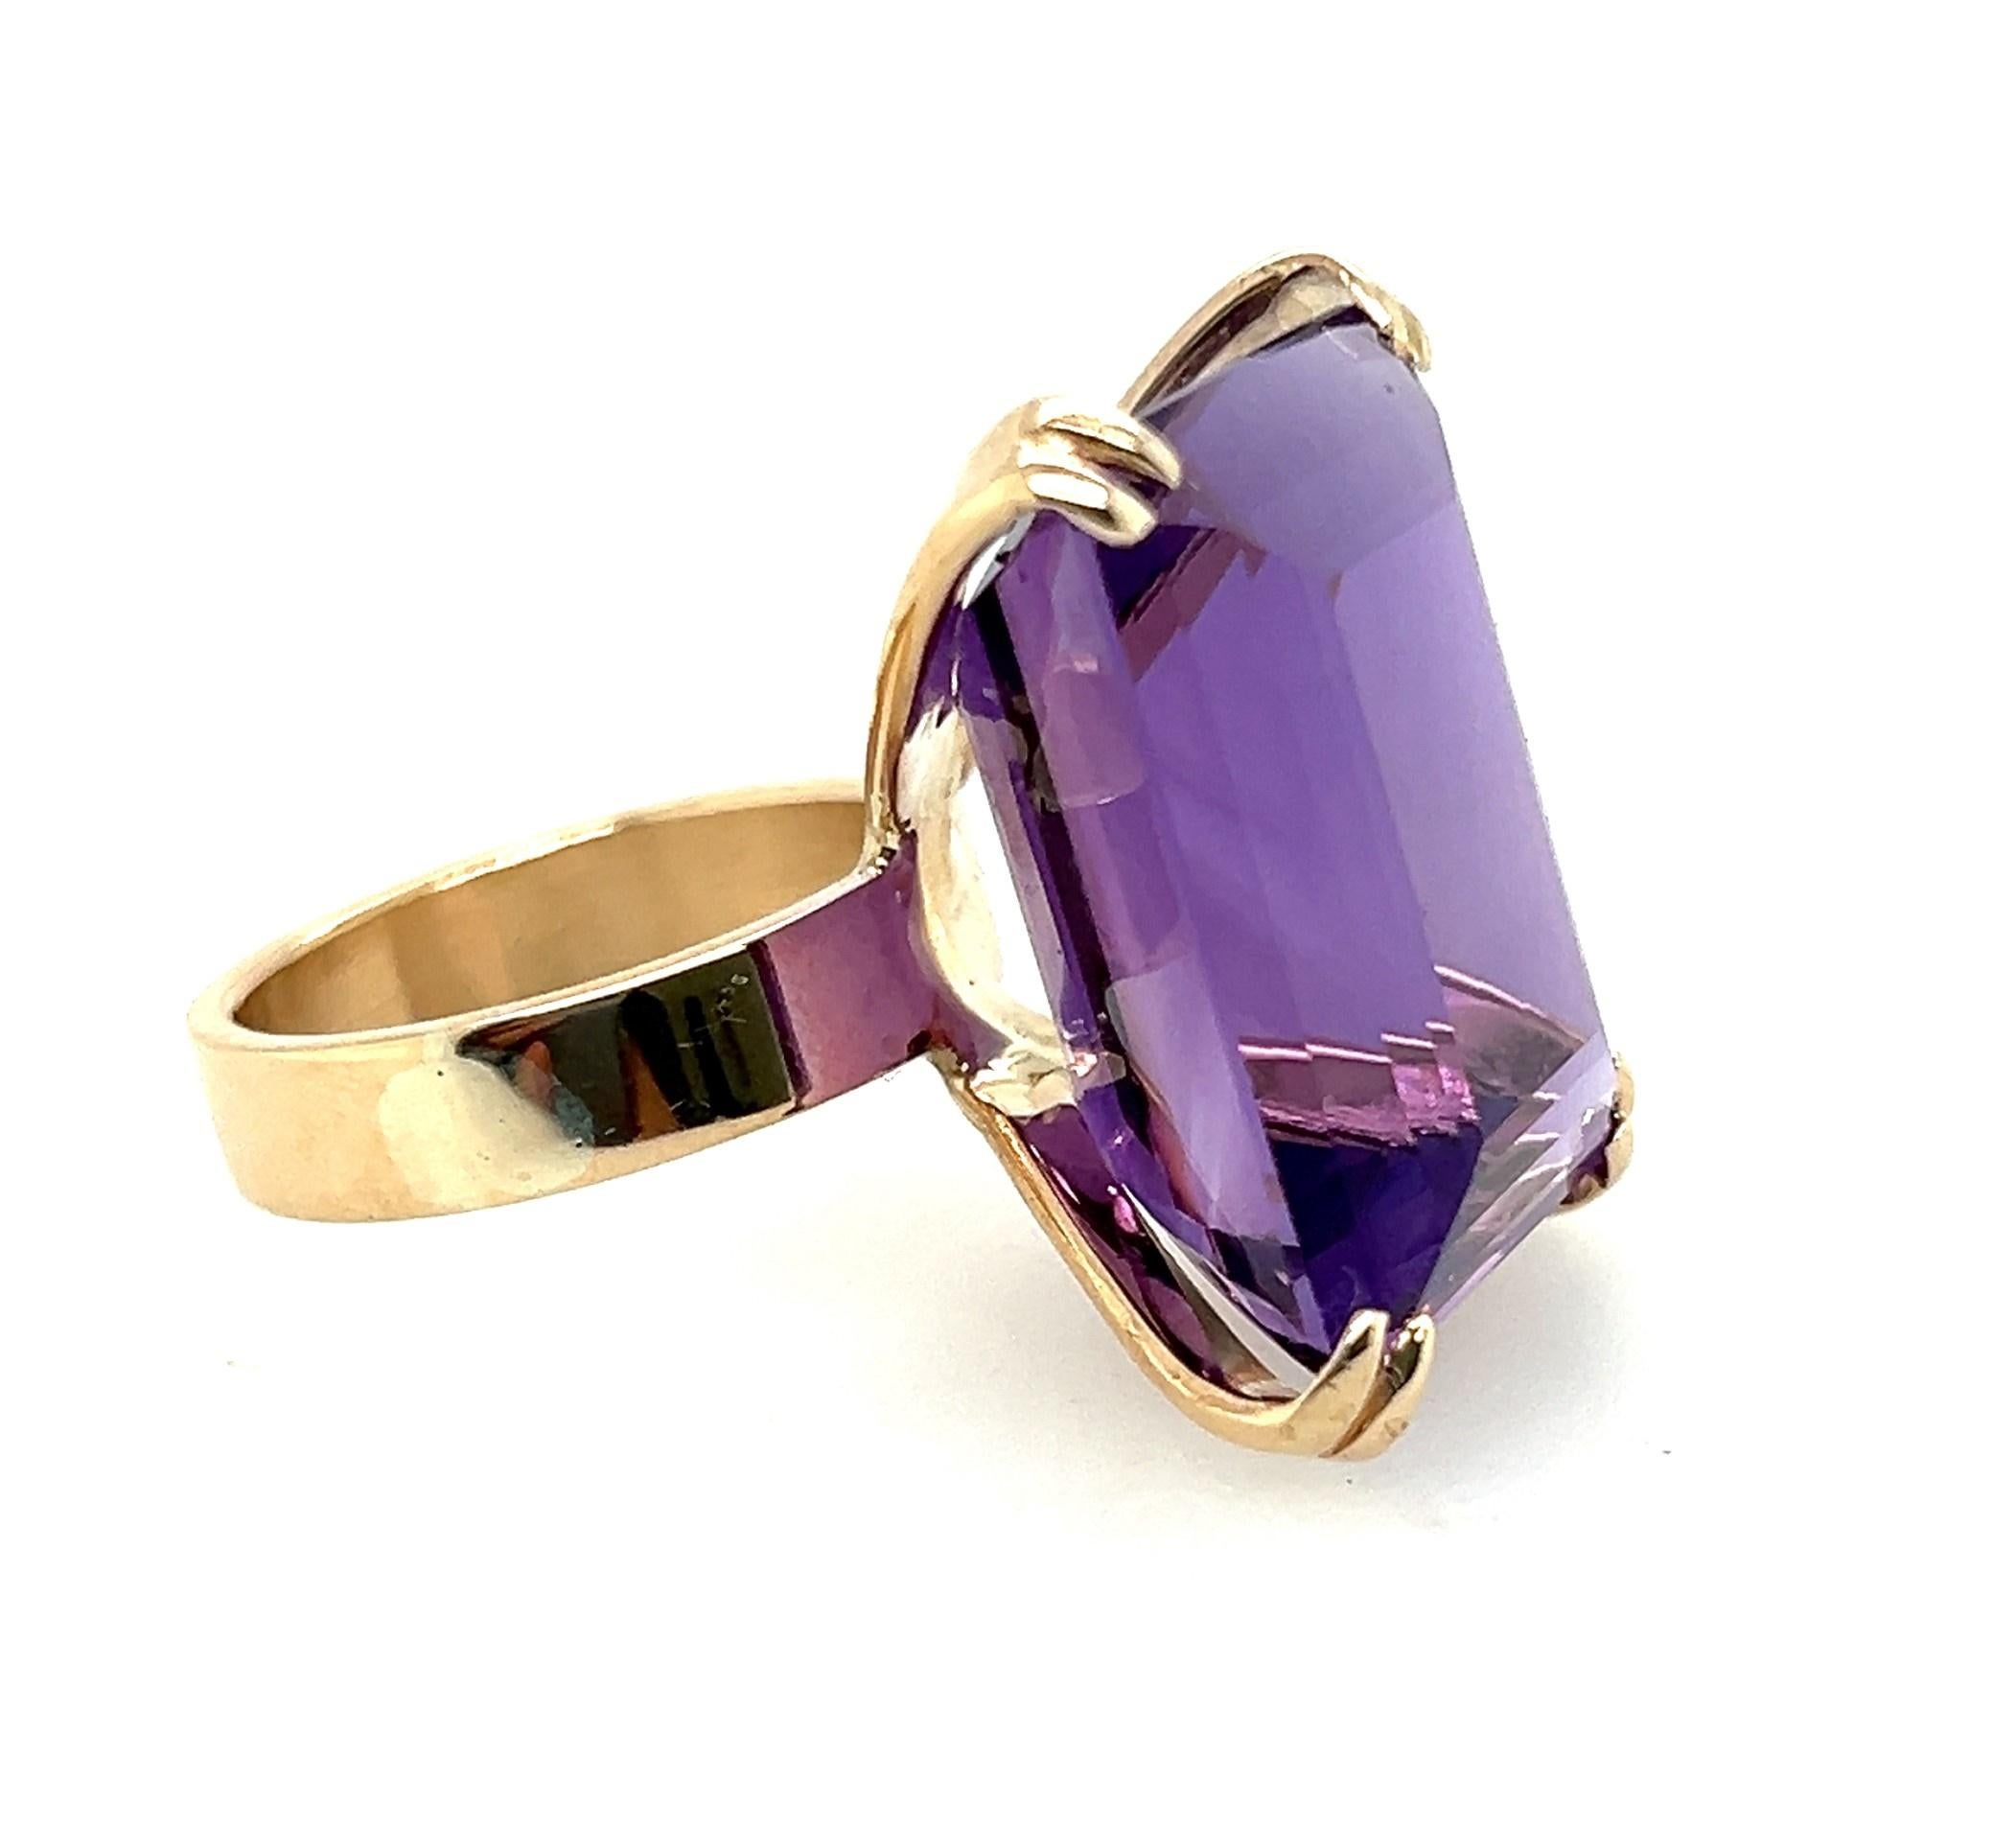 Emerald Cut 36.82 Carat Amethyst Cocktail Ring in 14kt Gold  For Sale